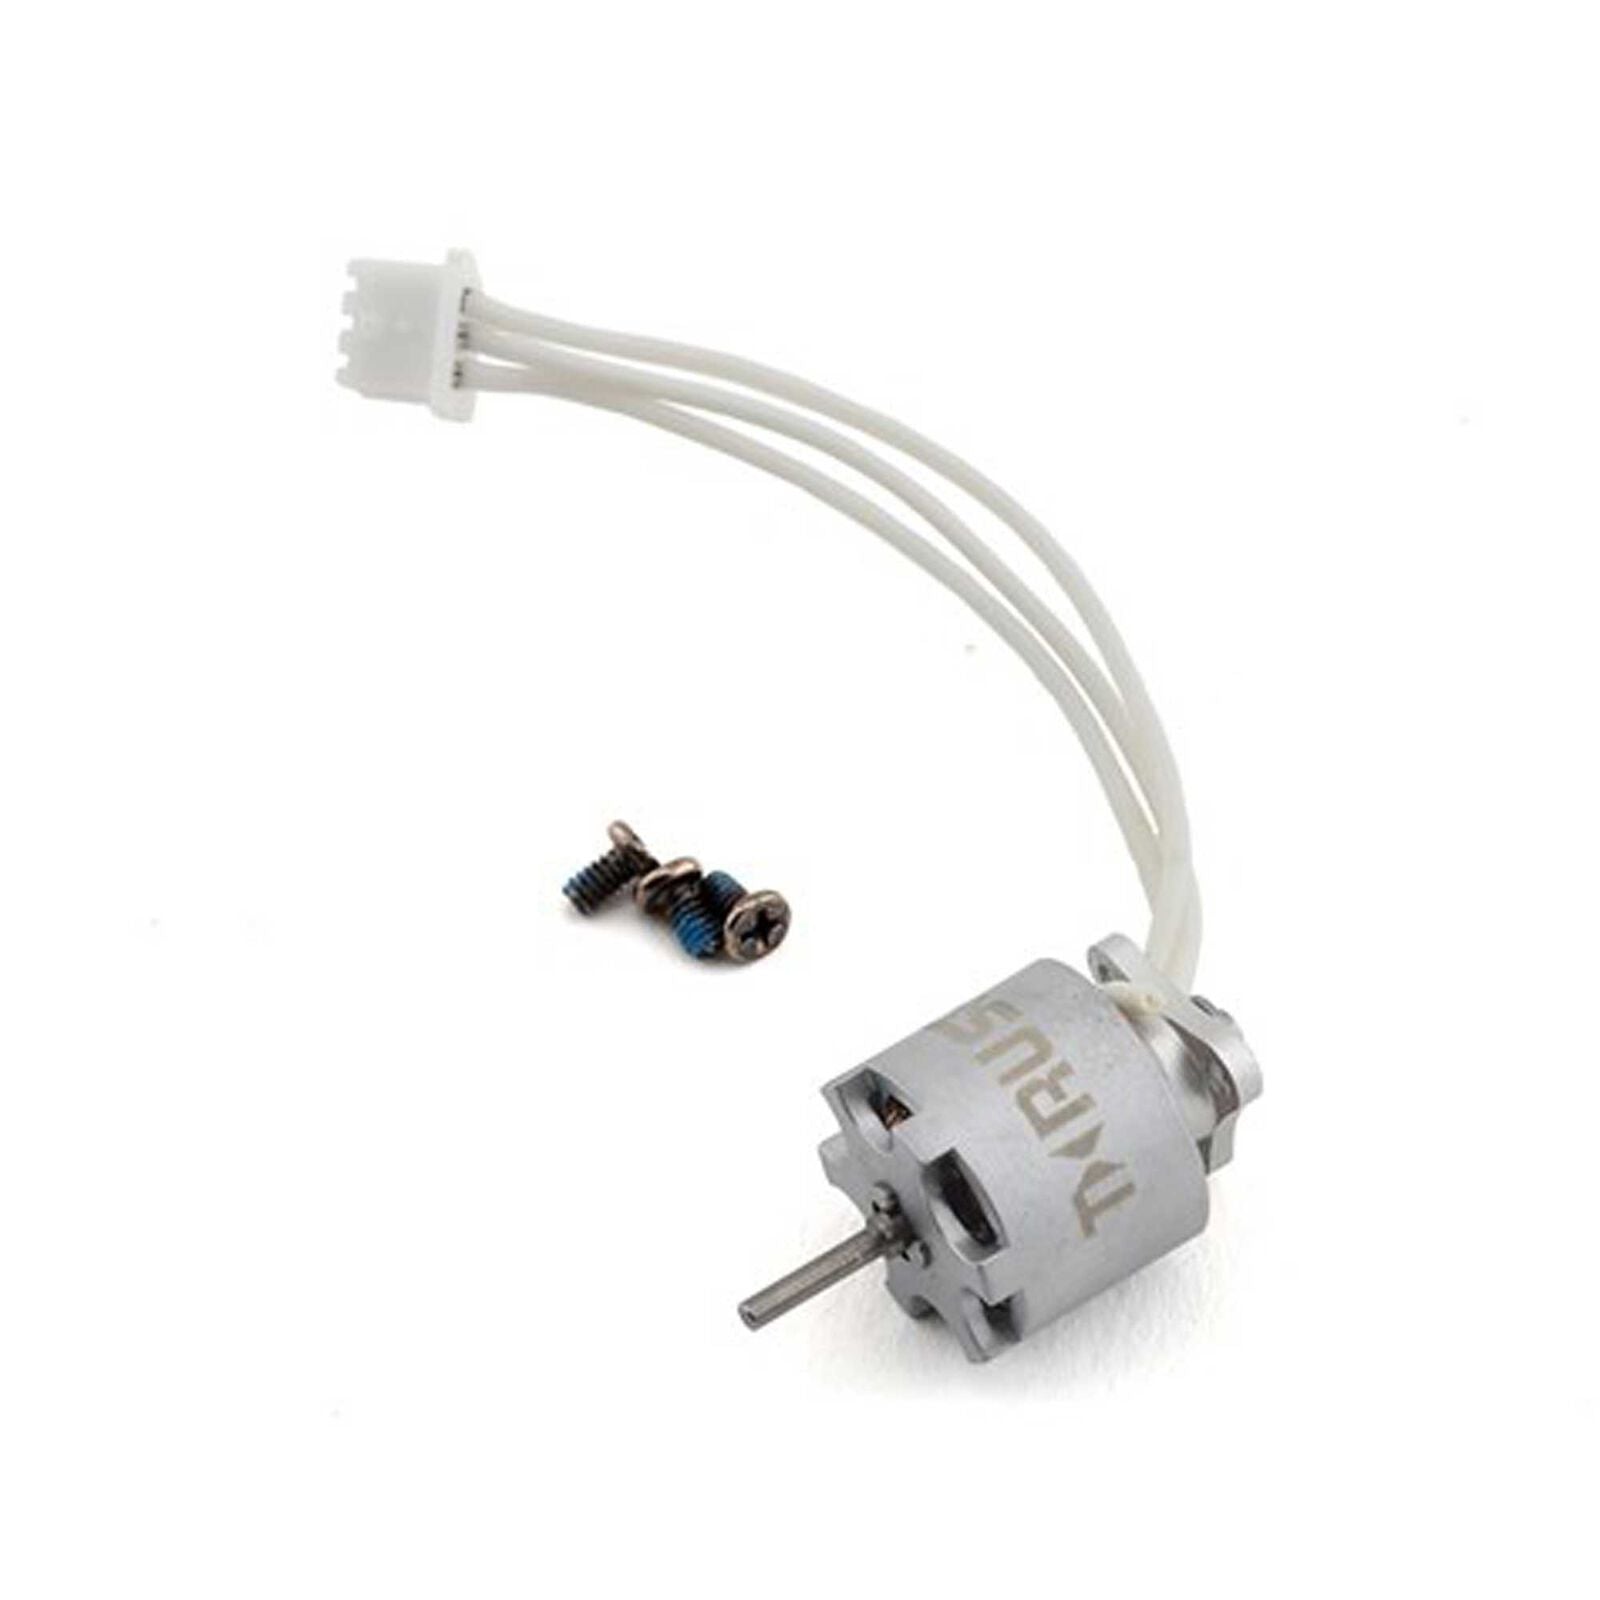 EFLITE BLADE BLH8853 Replacement motor: Inductrix BL